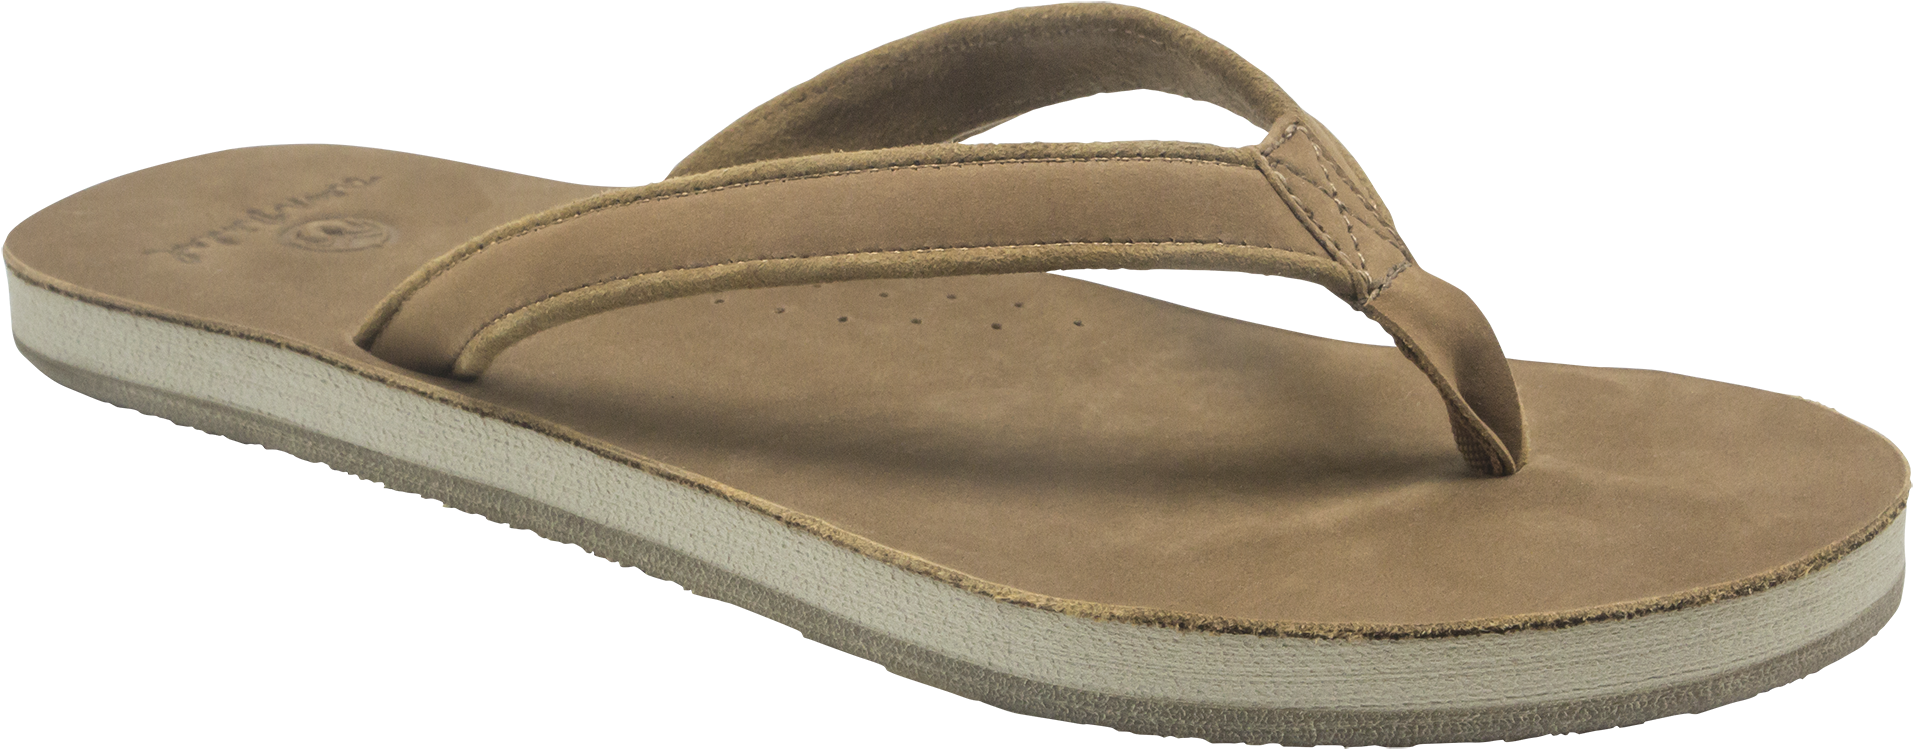 A Brown Sandal With A White Sole